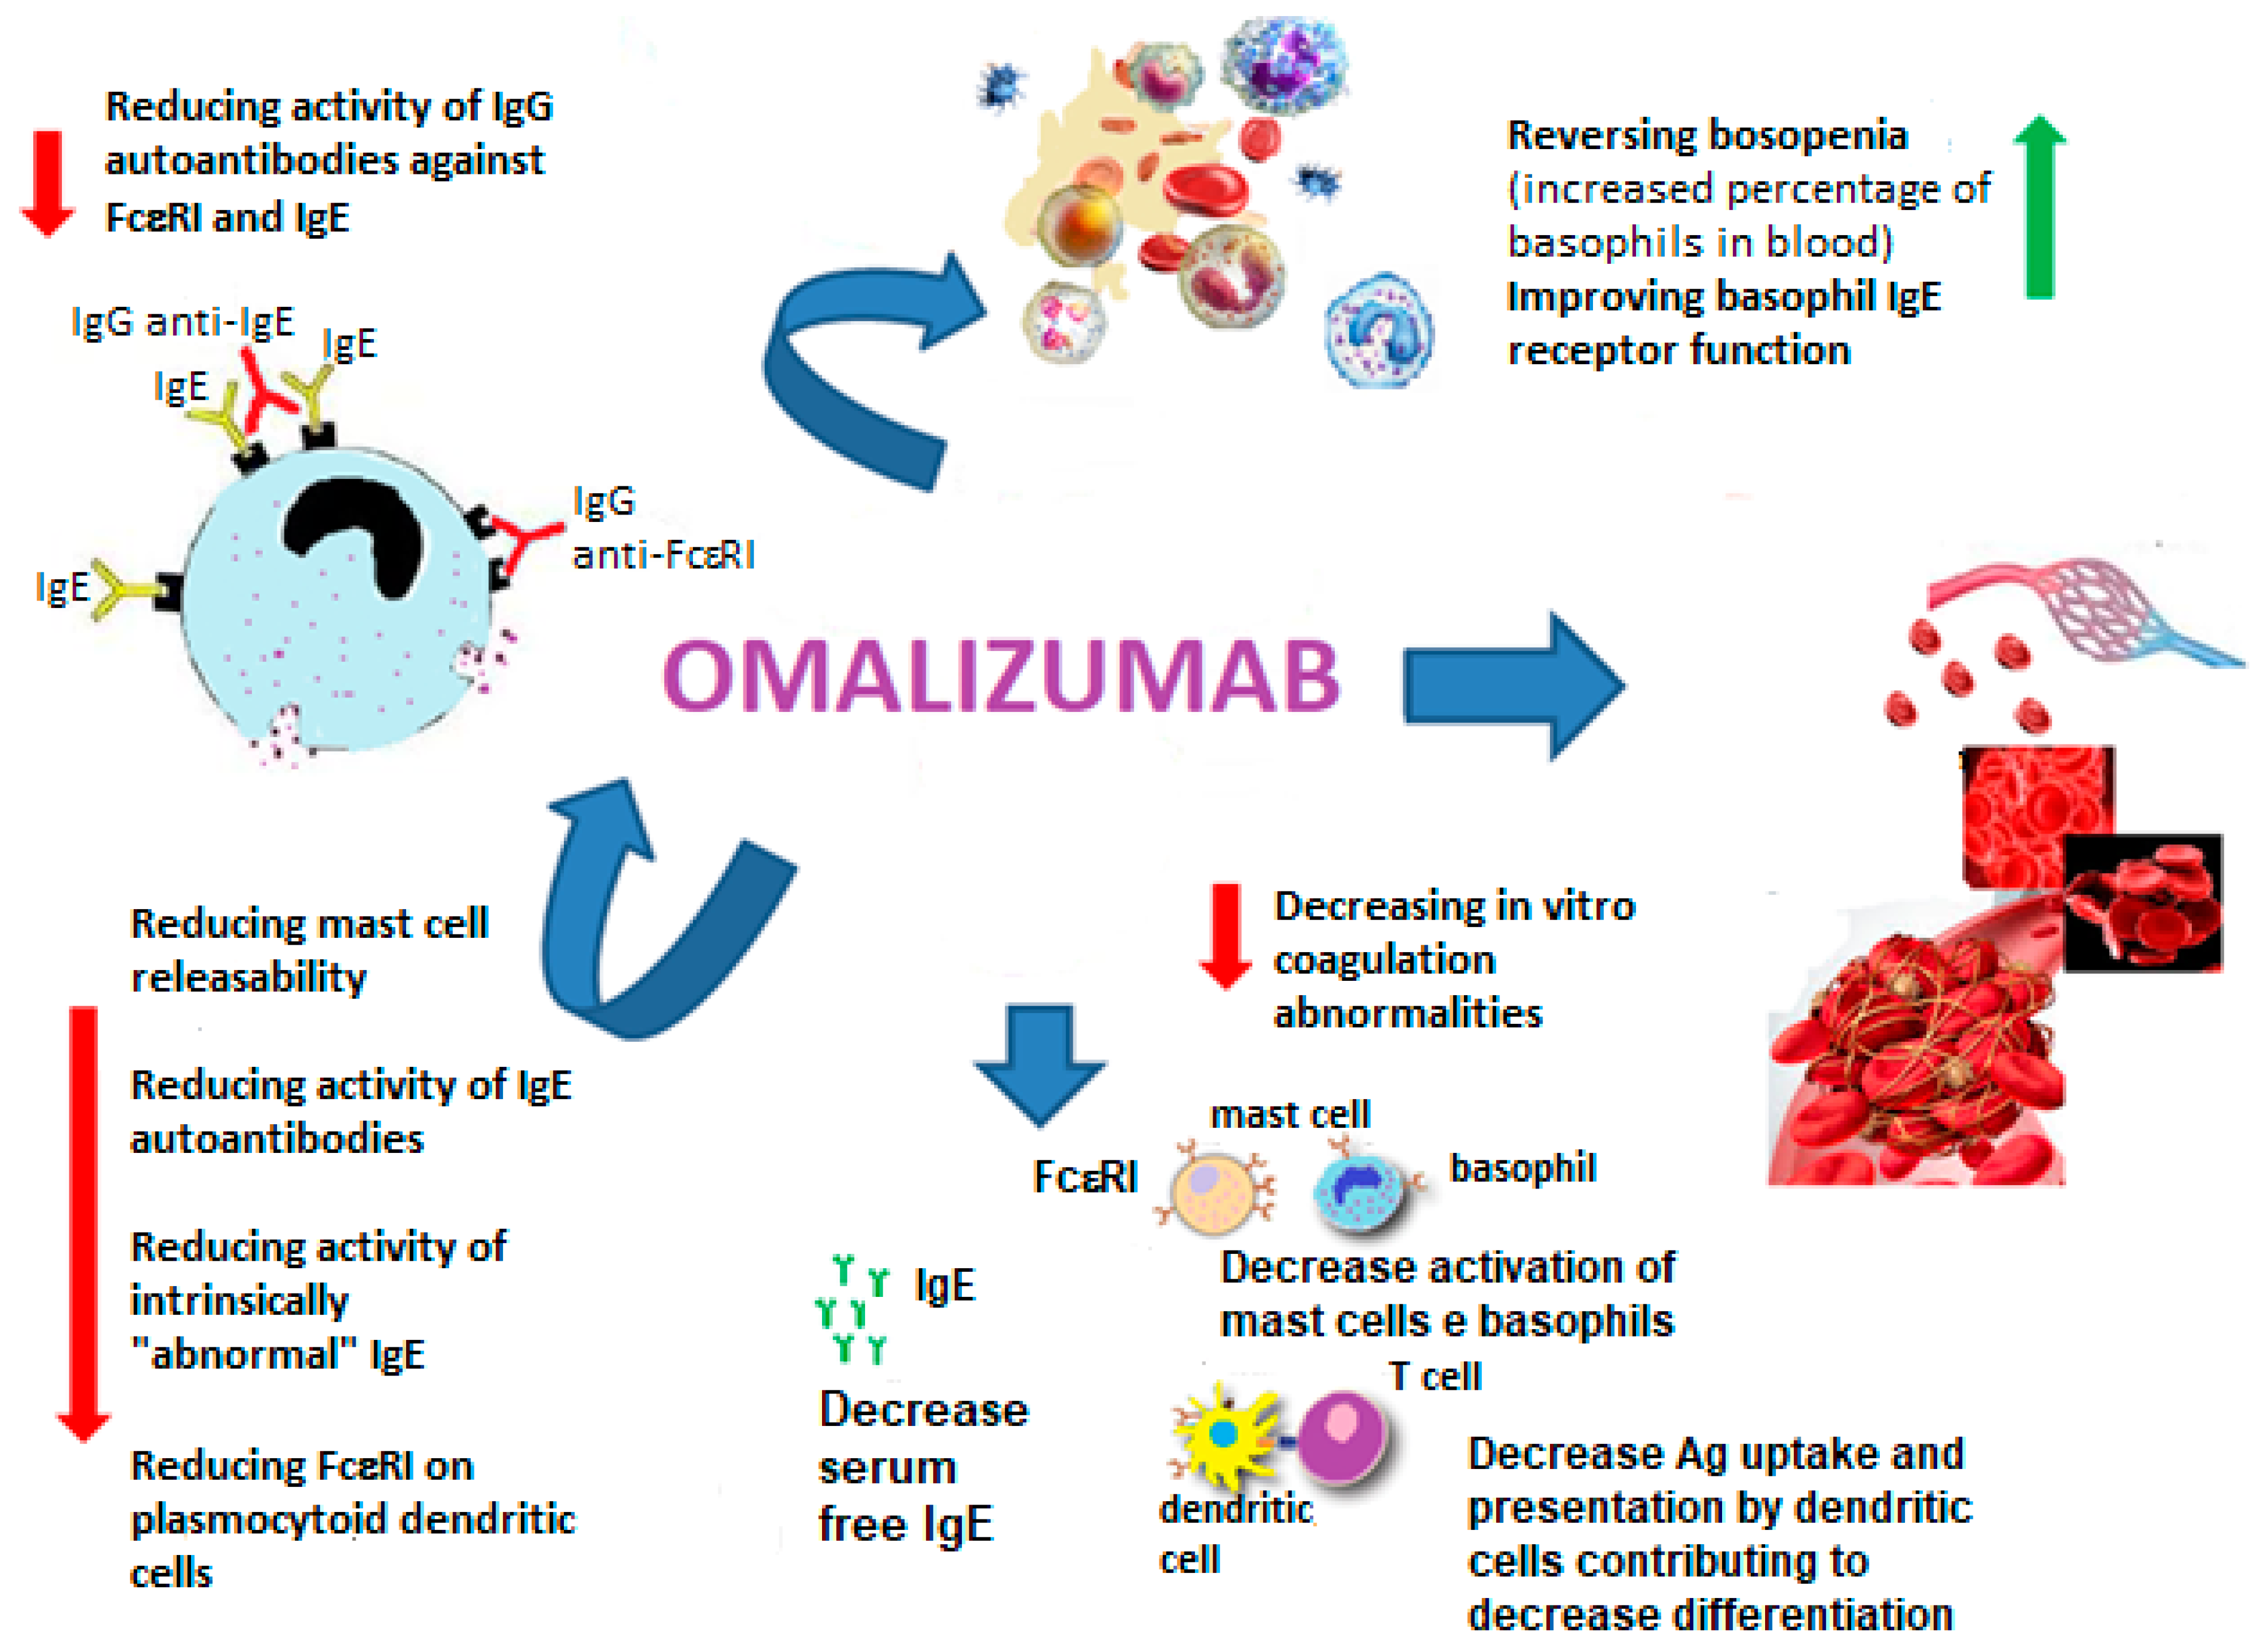 biomedicines-free-full-text-sex-allergic-diseases-and-omalizumab